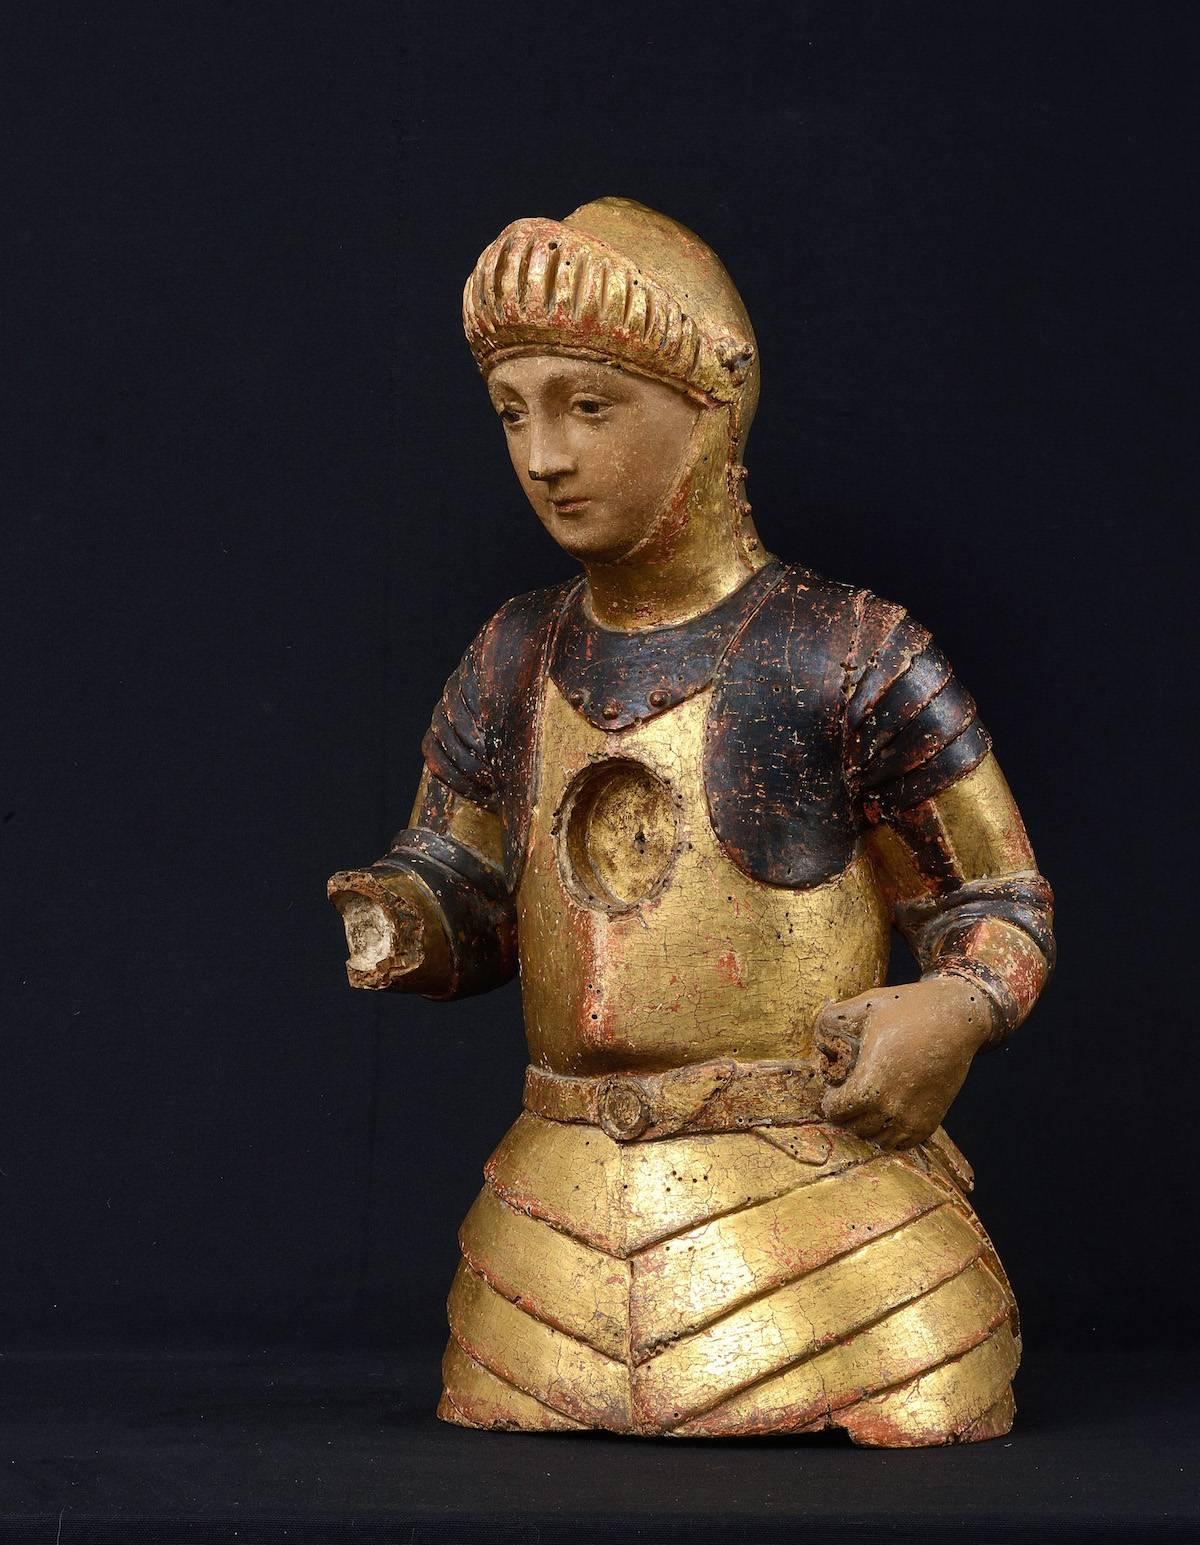 Reliquary bust of Saint George carved wood in the round, gilded and polychrome.
Tuscany, Siena, attributed to Francesco di Valdambrino, (circa 1363 - Siena, 1435),
first half of the 15th century.Reliquary bust of St. George carved and gilded wood.